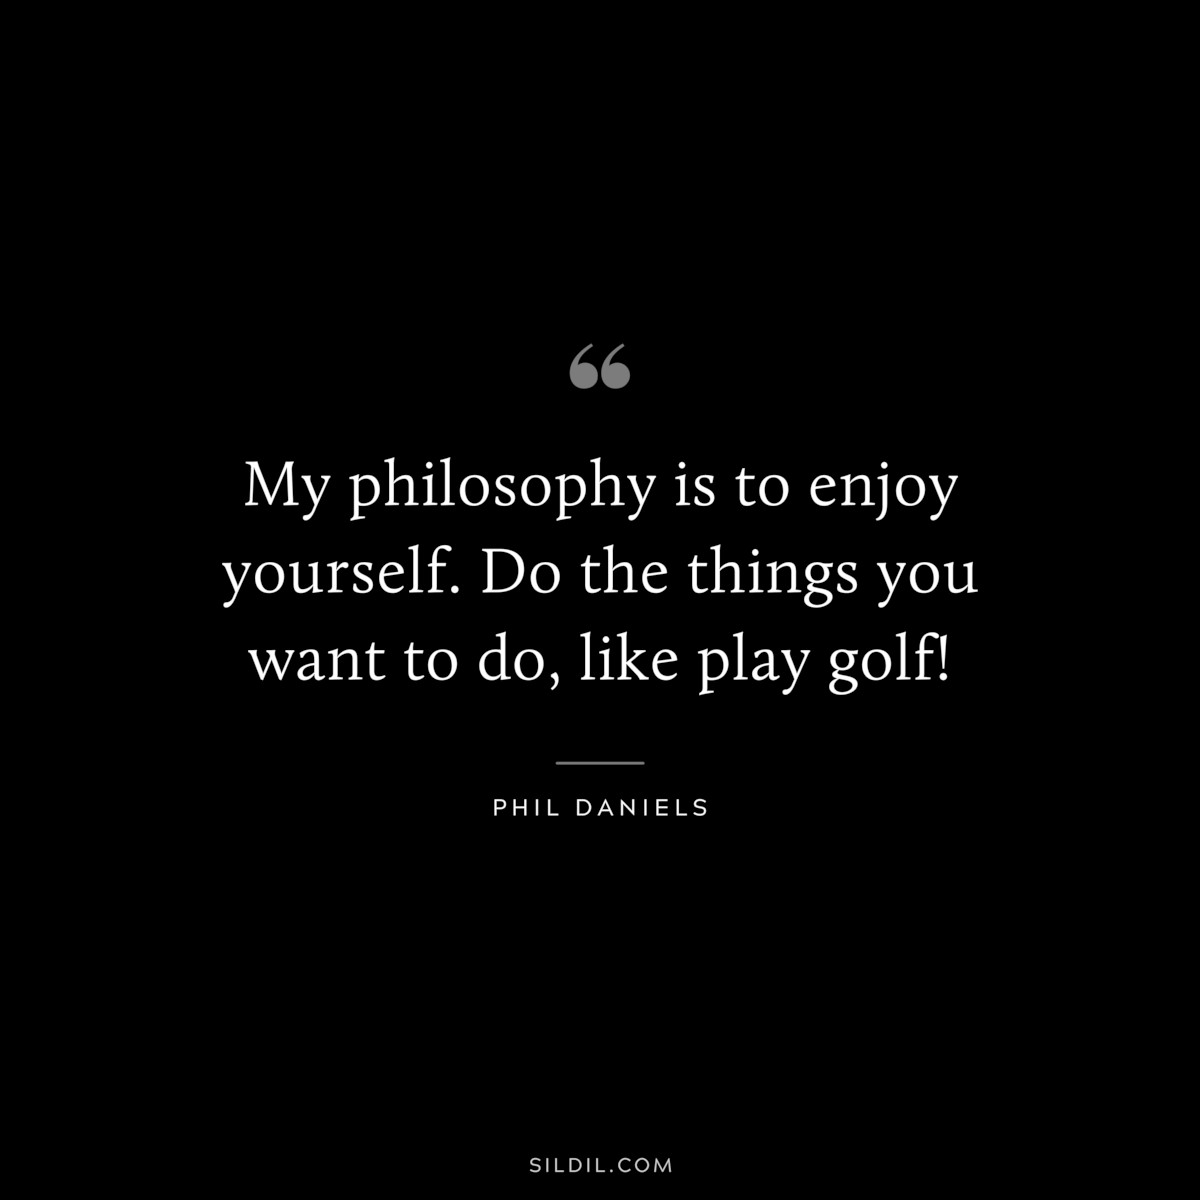 My philosophy is to enjoy yourself. Do the things you want to do, like play golf! ― Phil Daniels